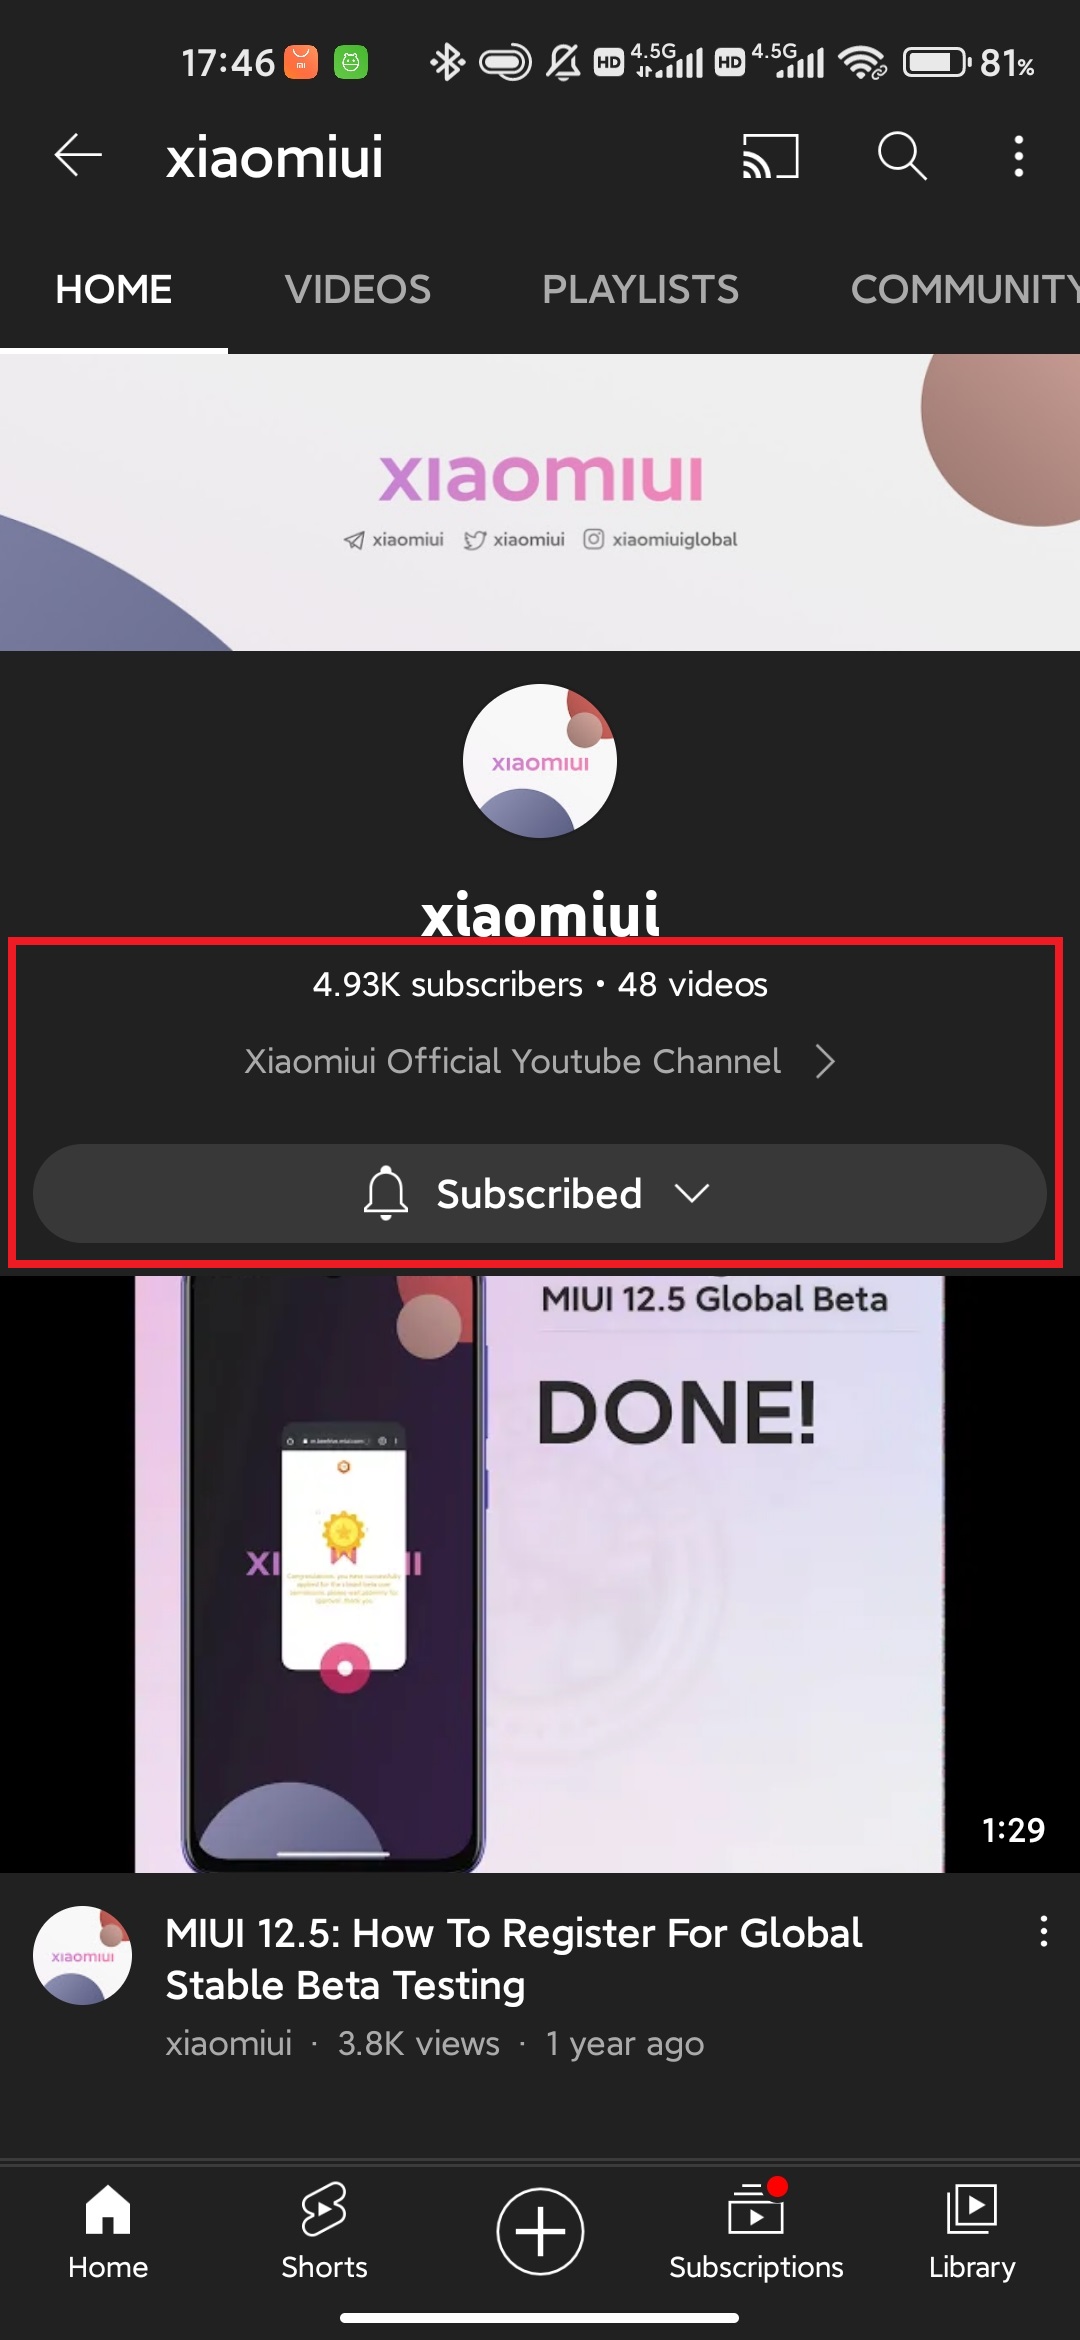 New subscribe button